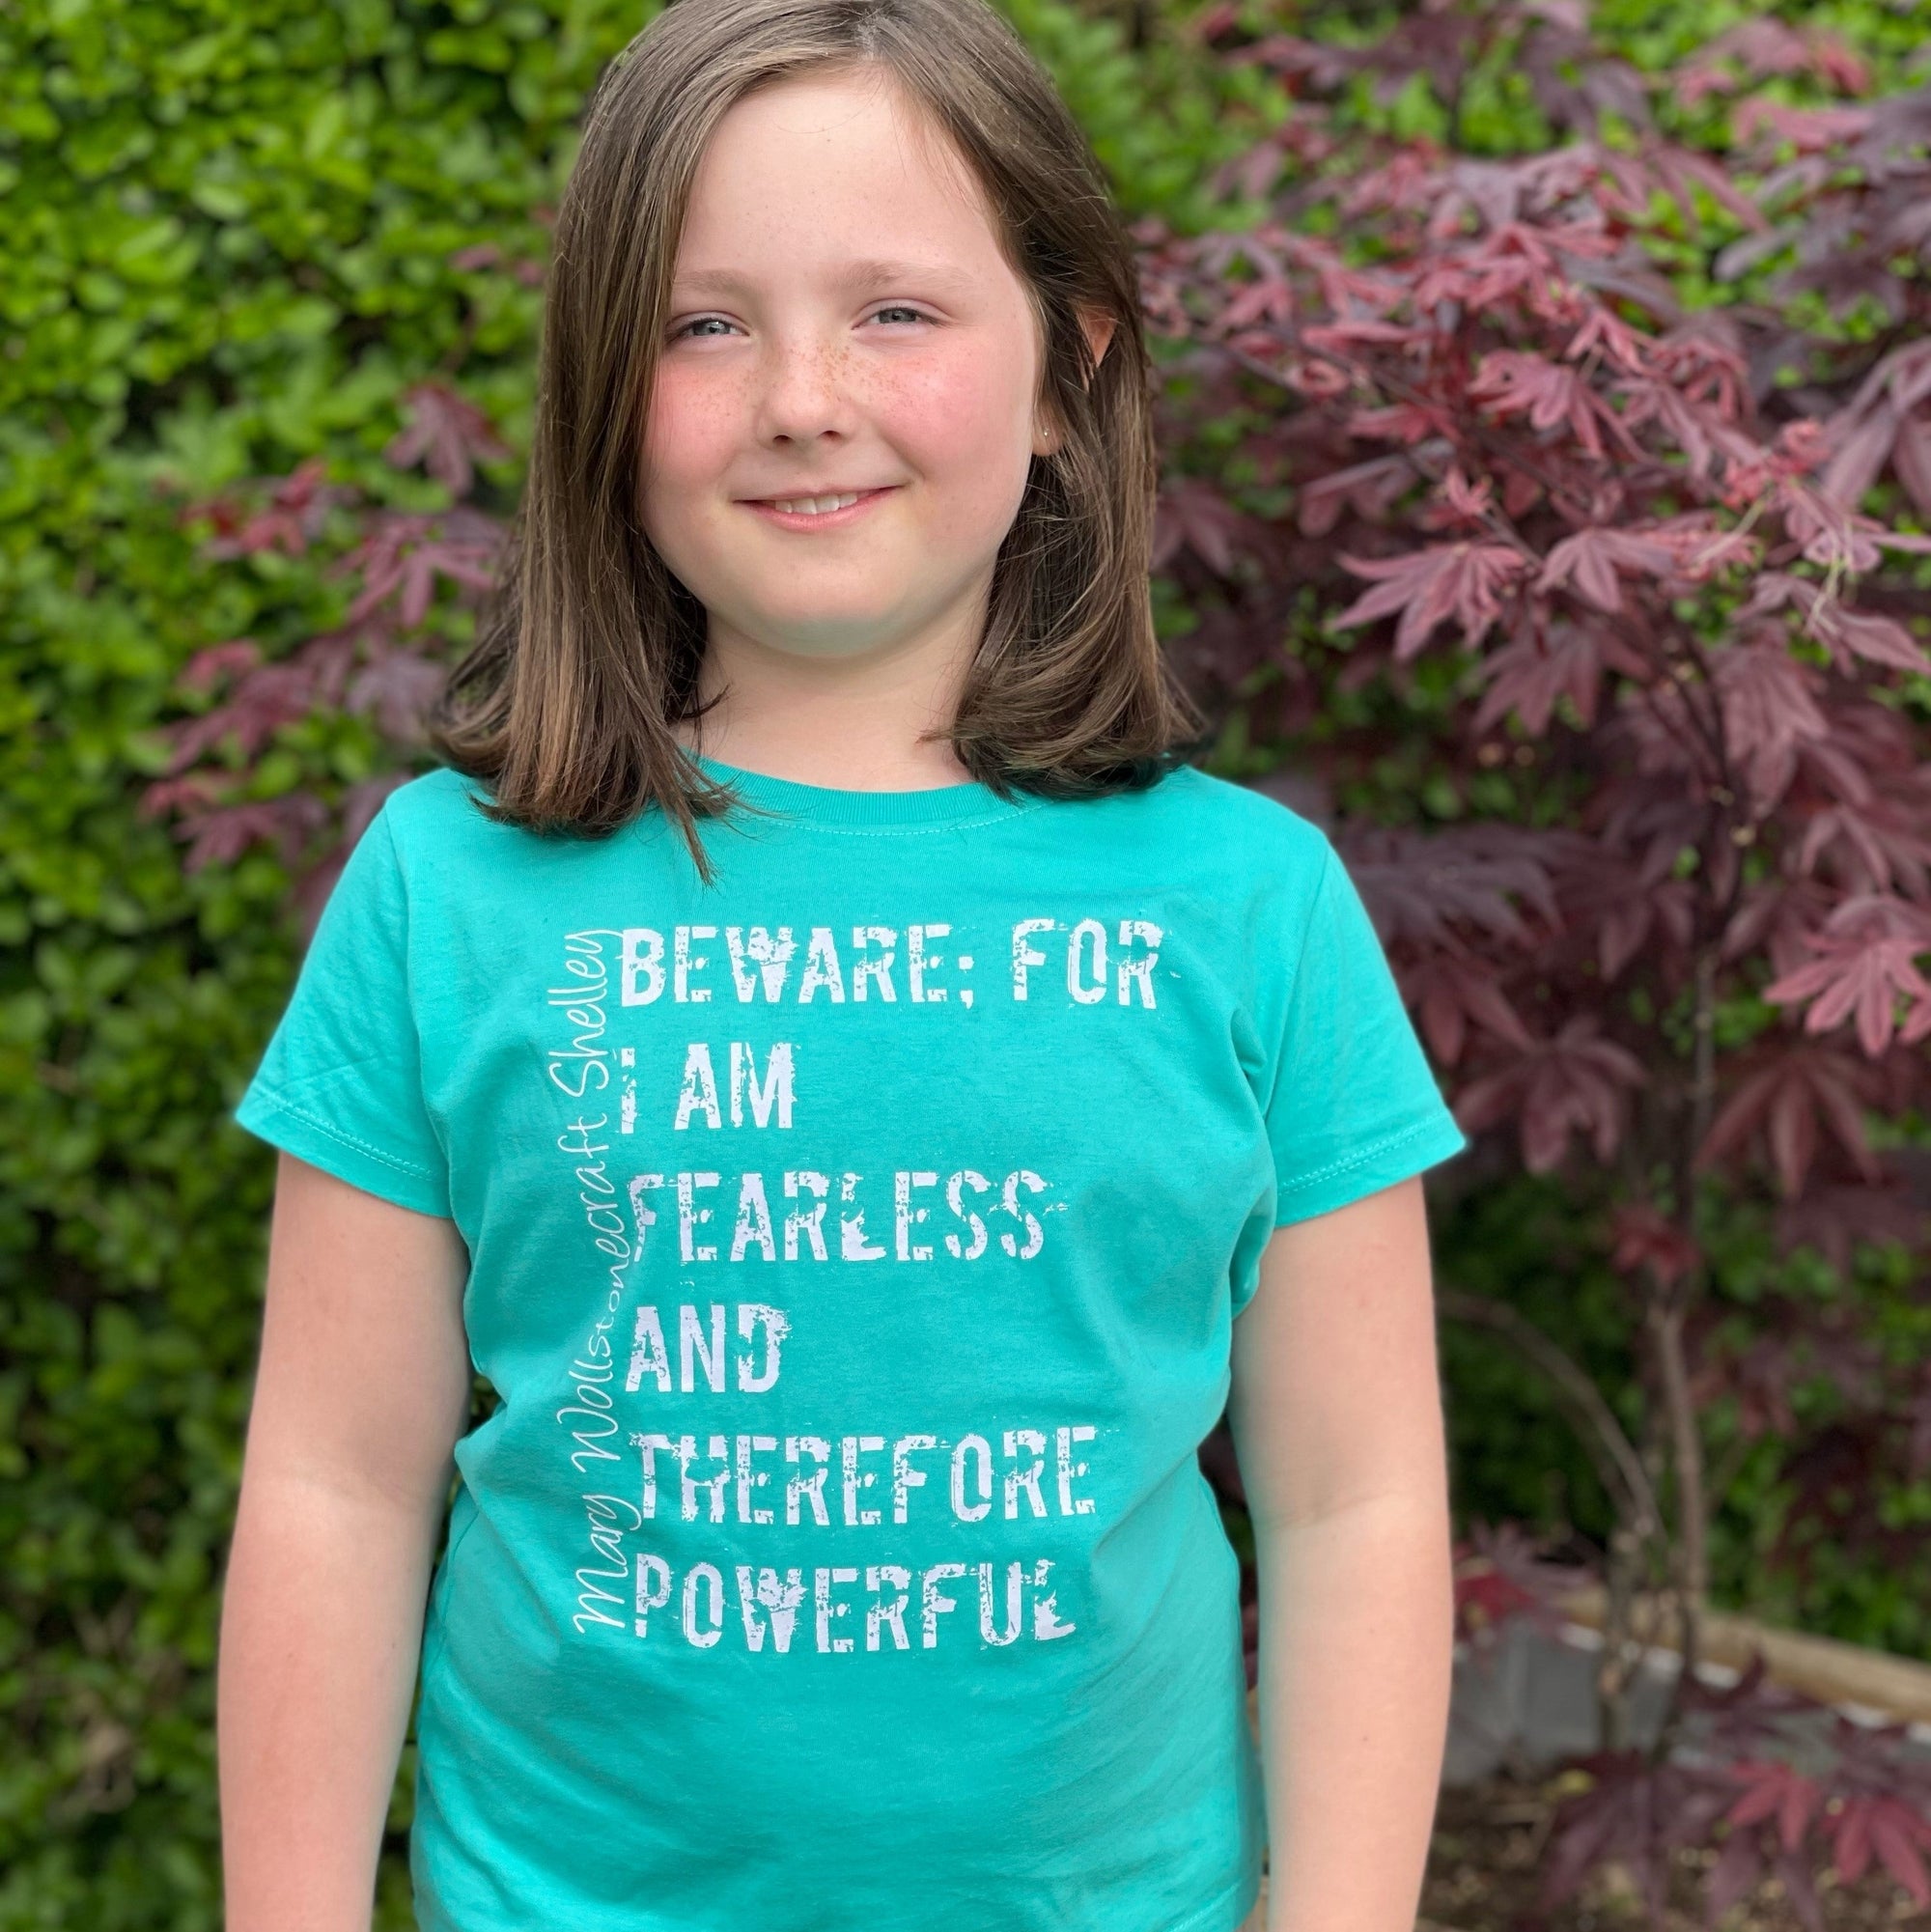 Beware For I am Fearless and Therefore Powerful Organic Cotton Girls T-Shirt - Scarf Monkey